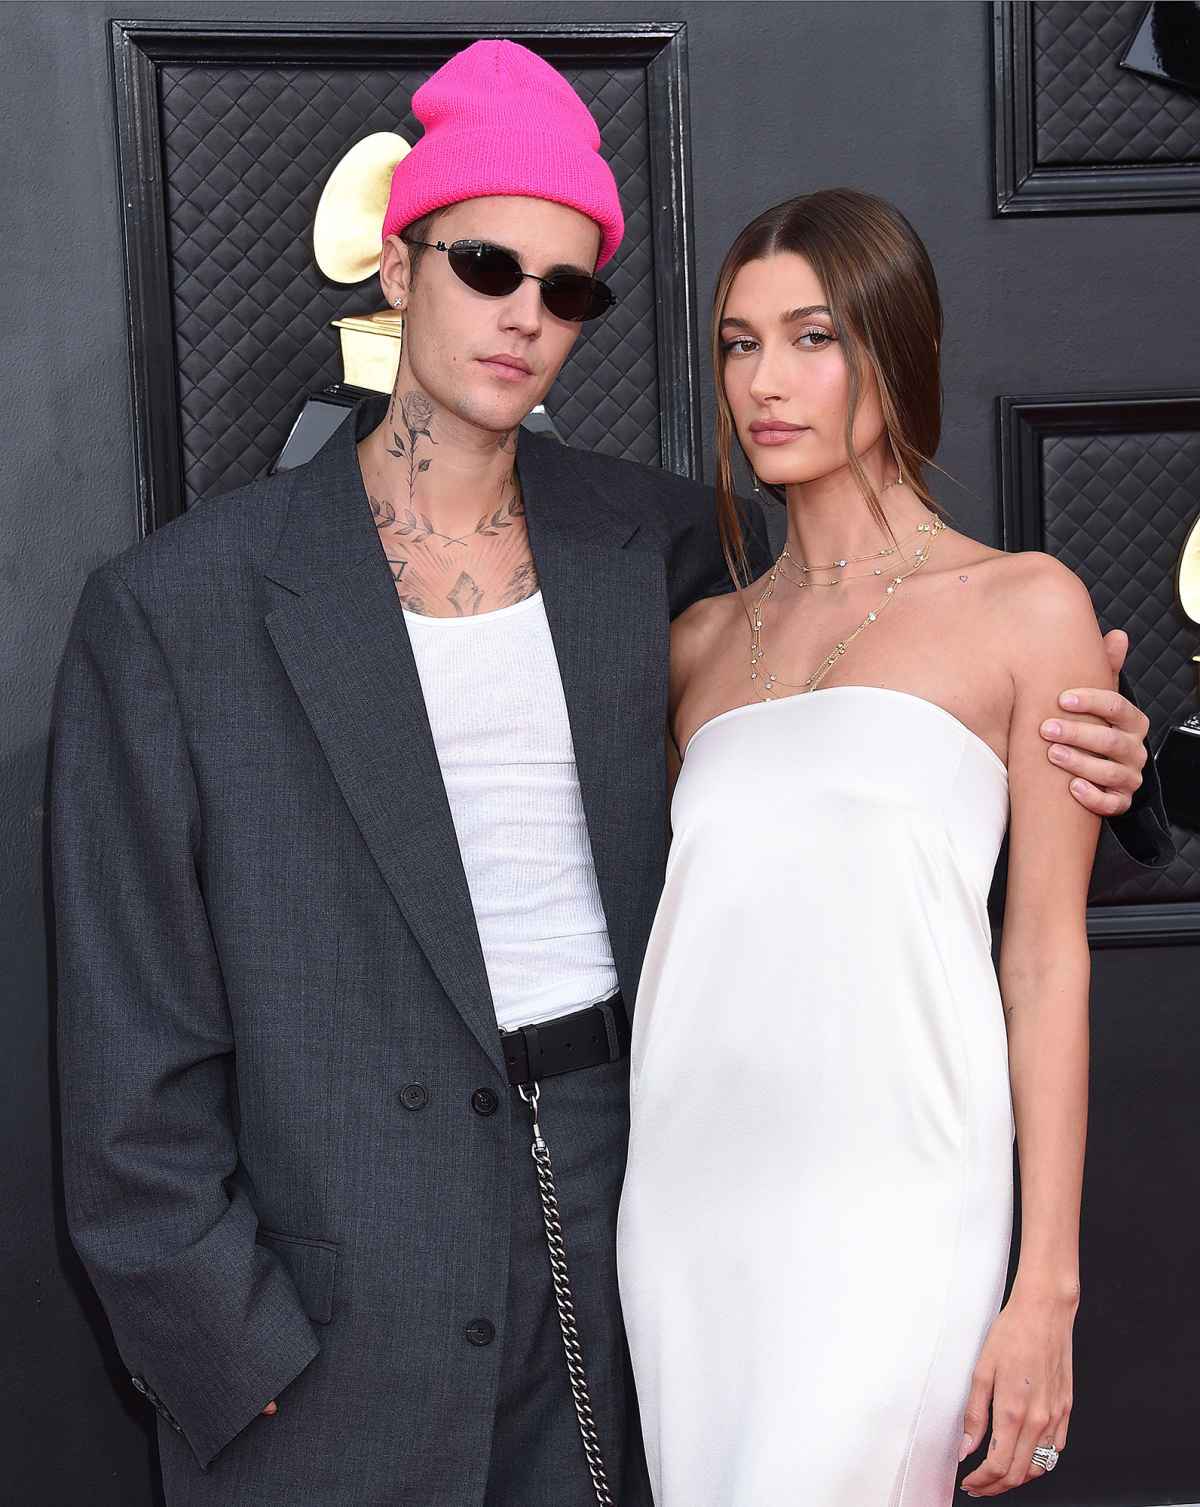 Hailey Bieber Supports Husband Justin After His Ramsay Hunt Syndrome Diagnosis: ‘Love U Baby’